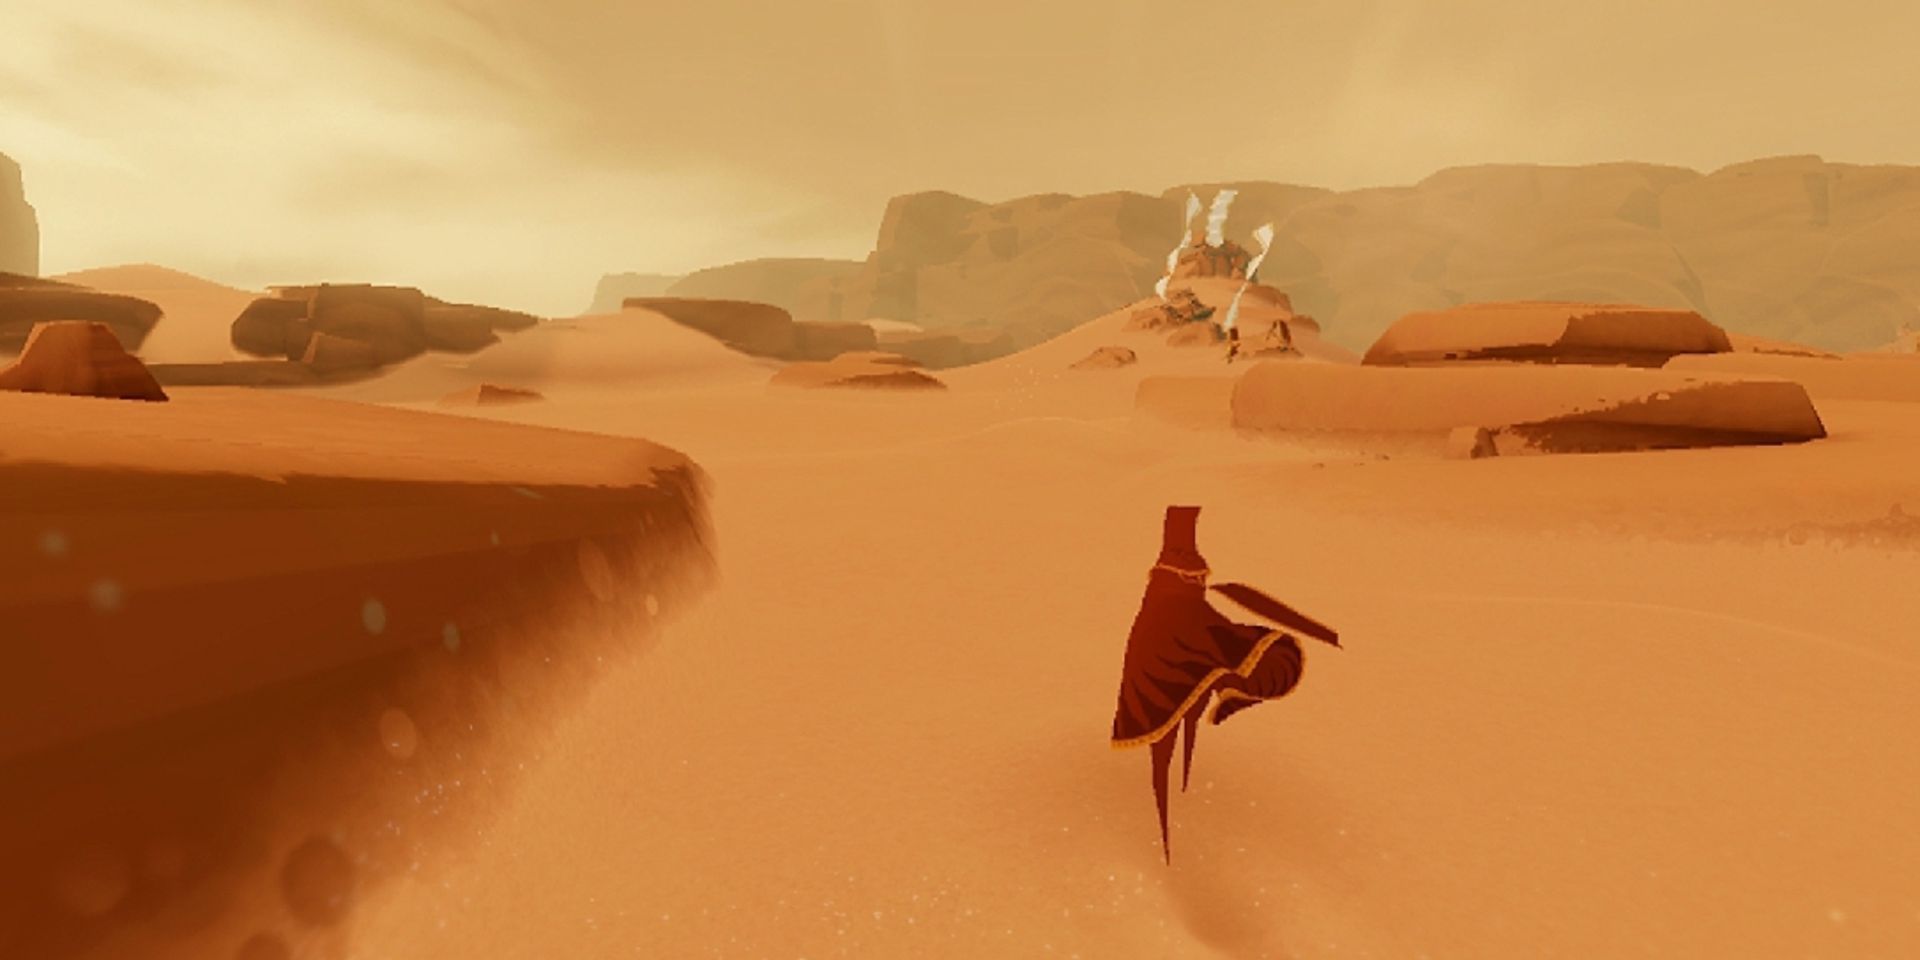 does journey have multiple endings